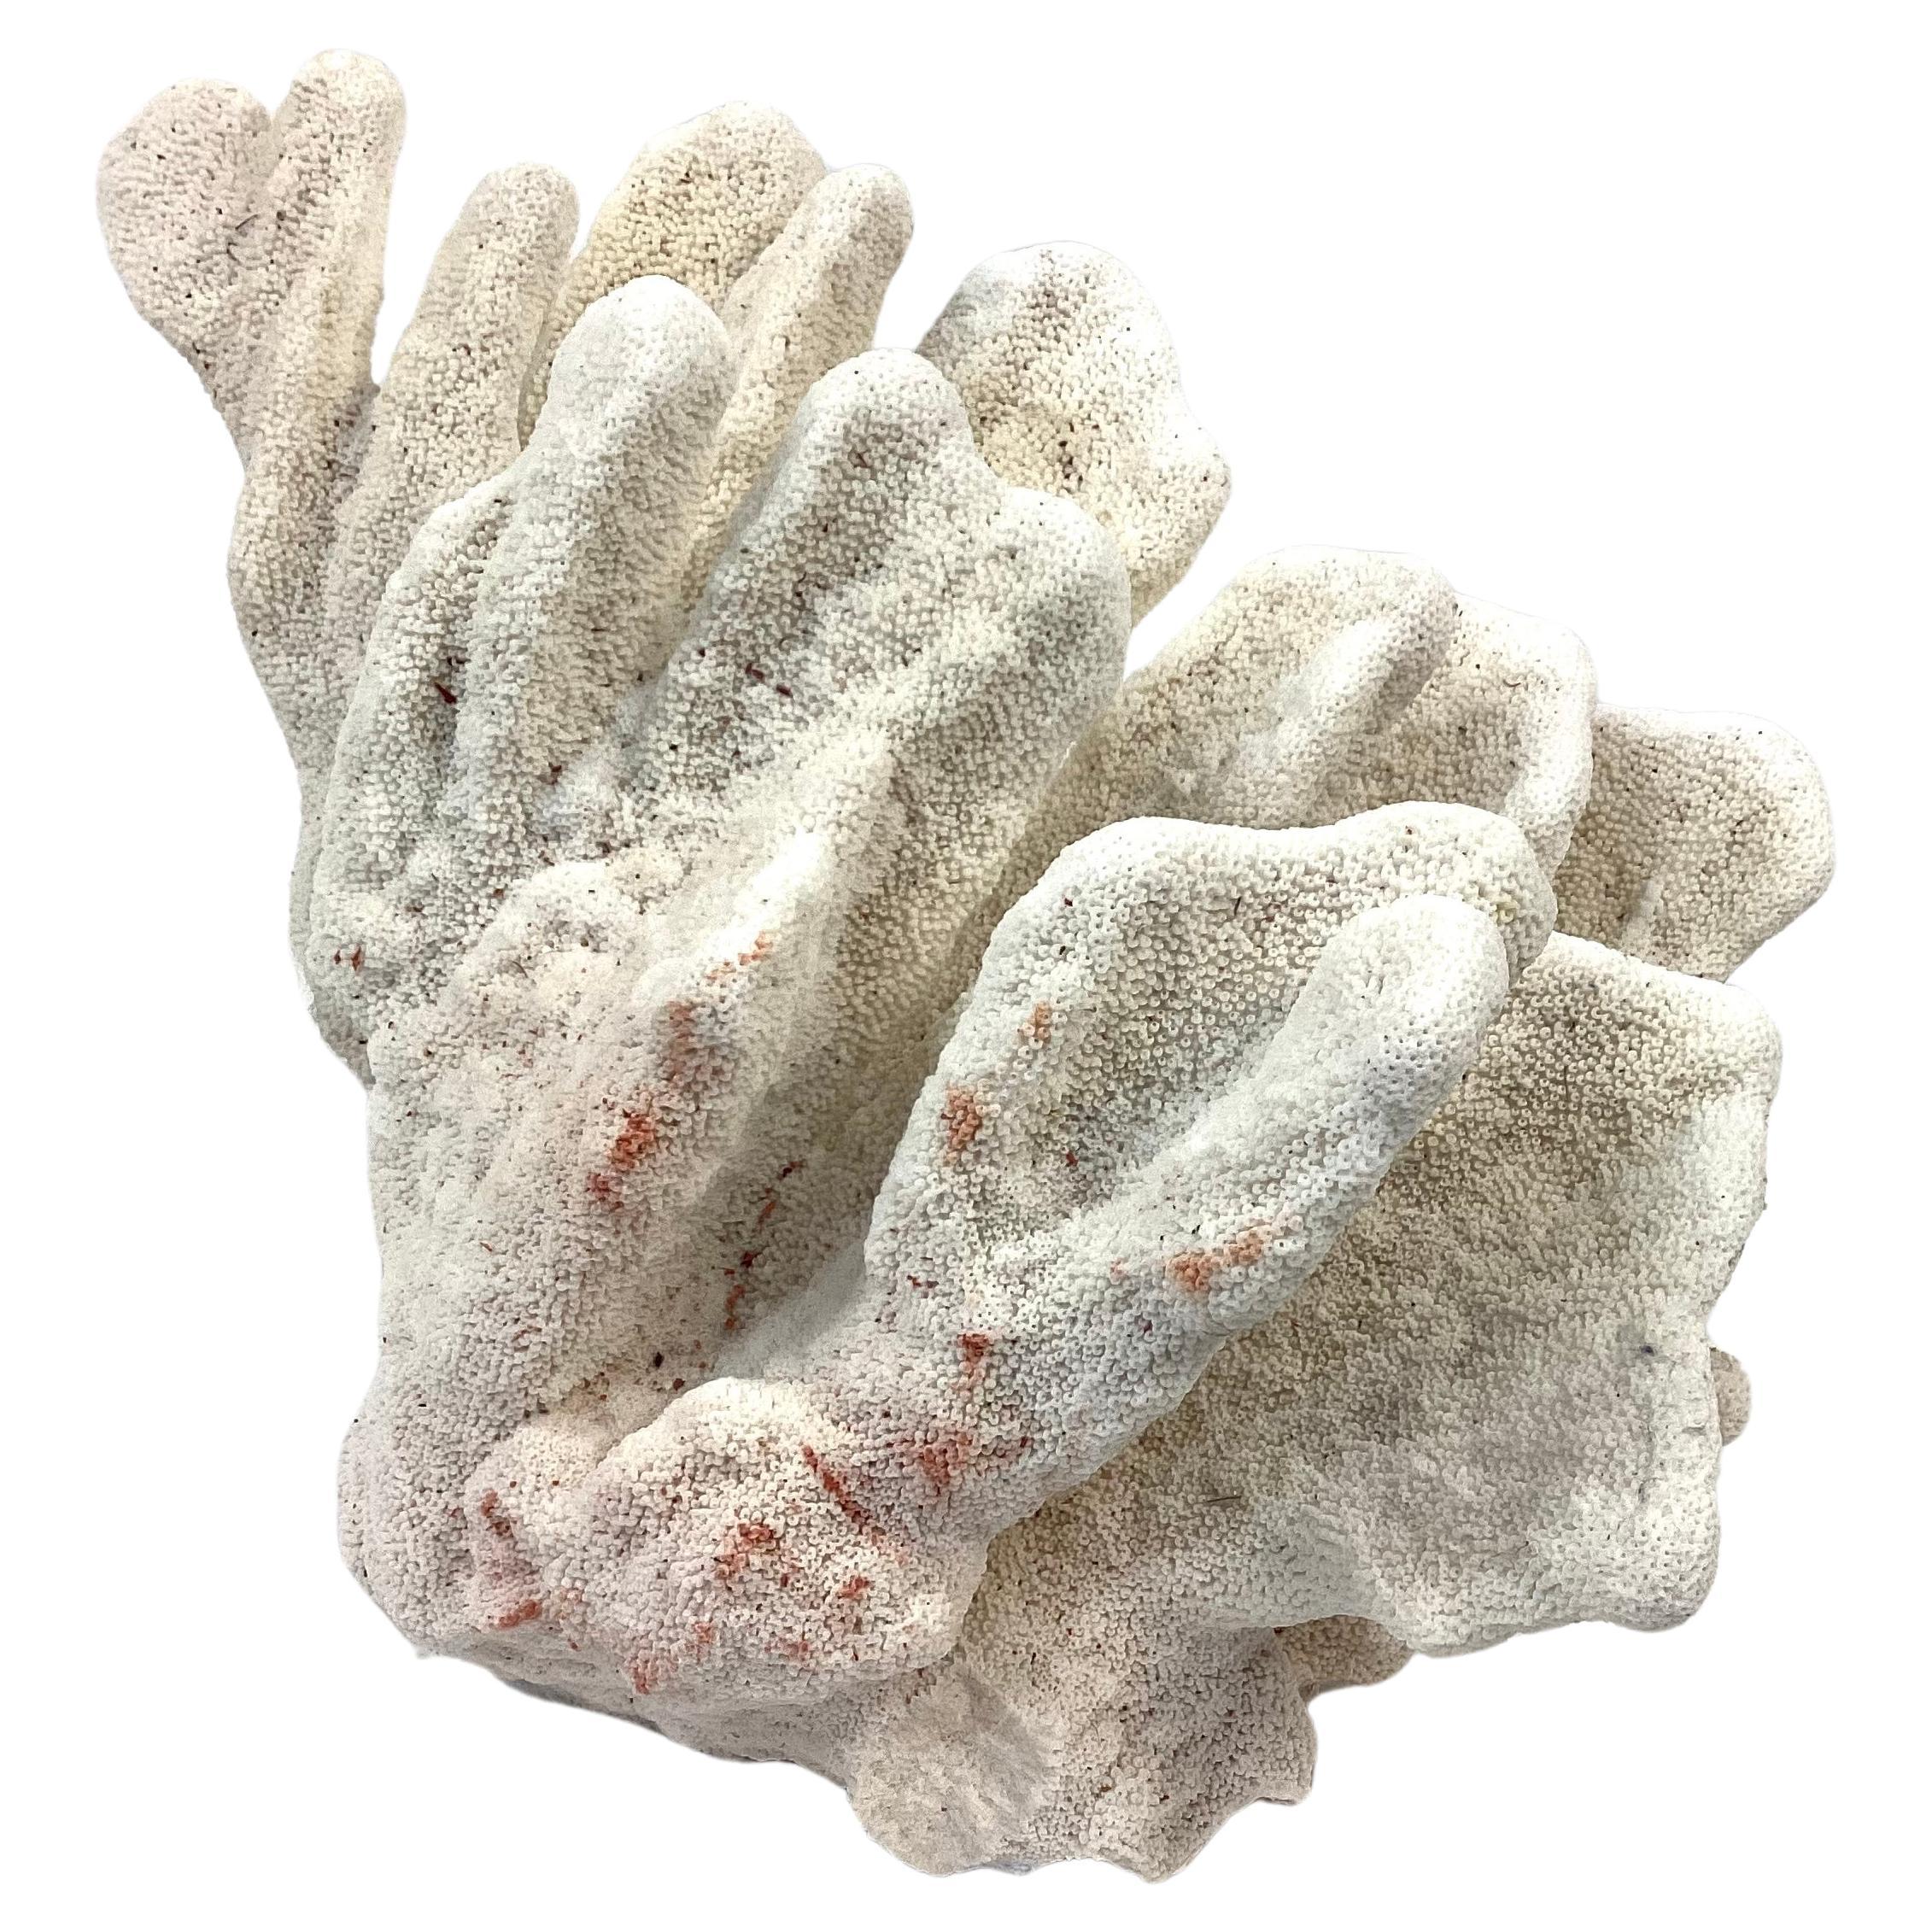 Organic Modern Large Natural White Coral Reef Specimen #6 For Sale